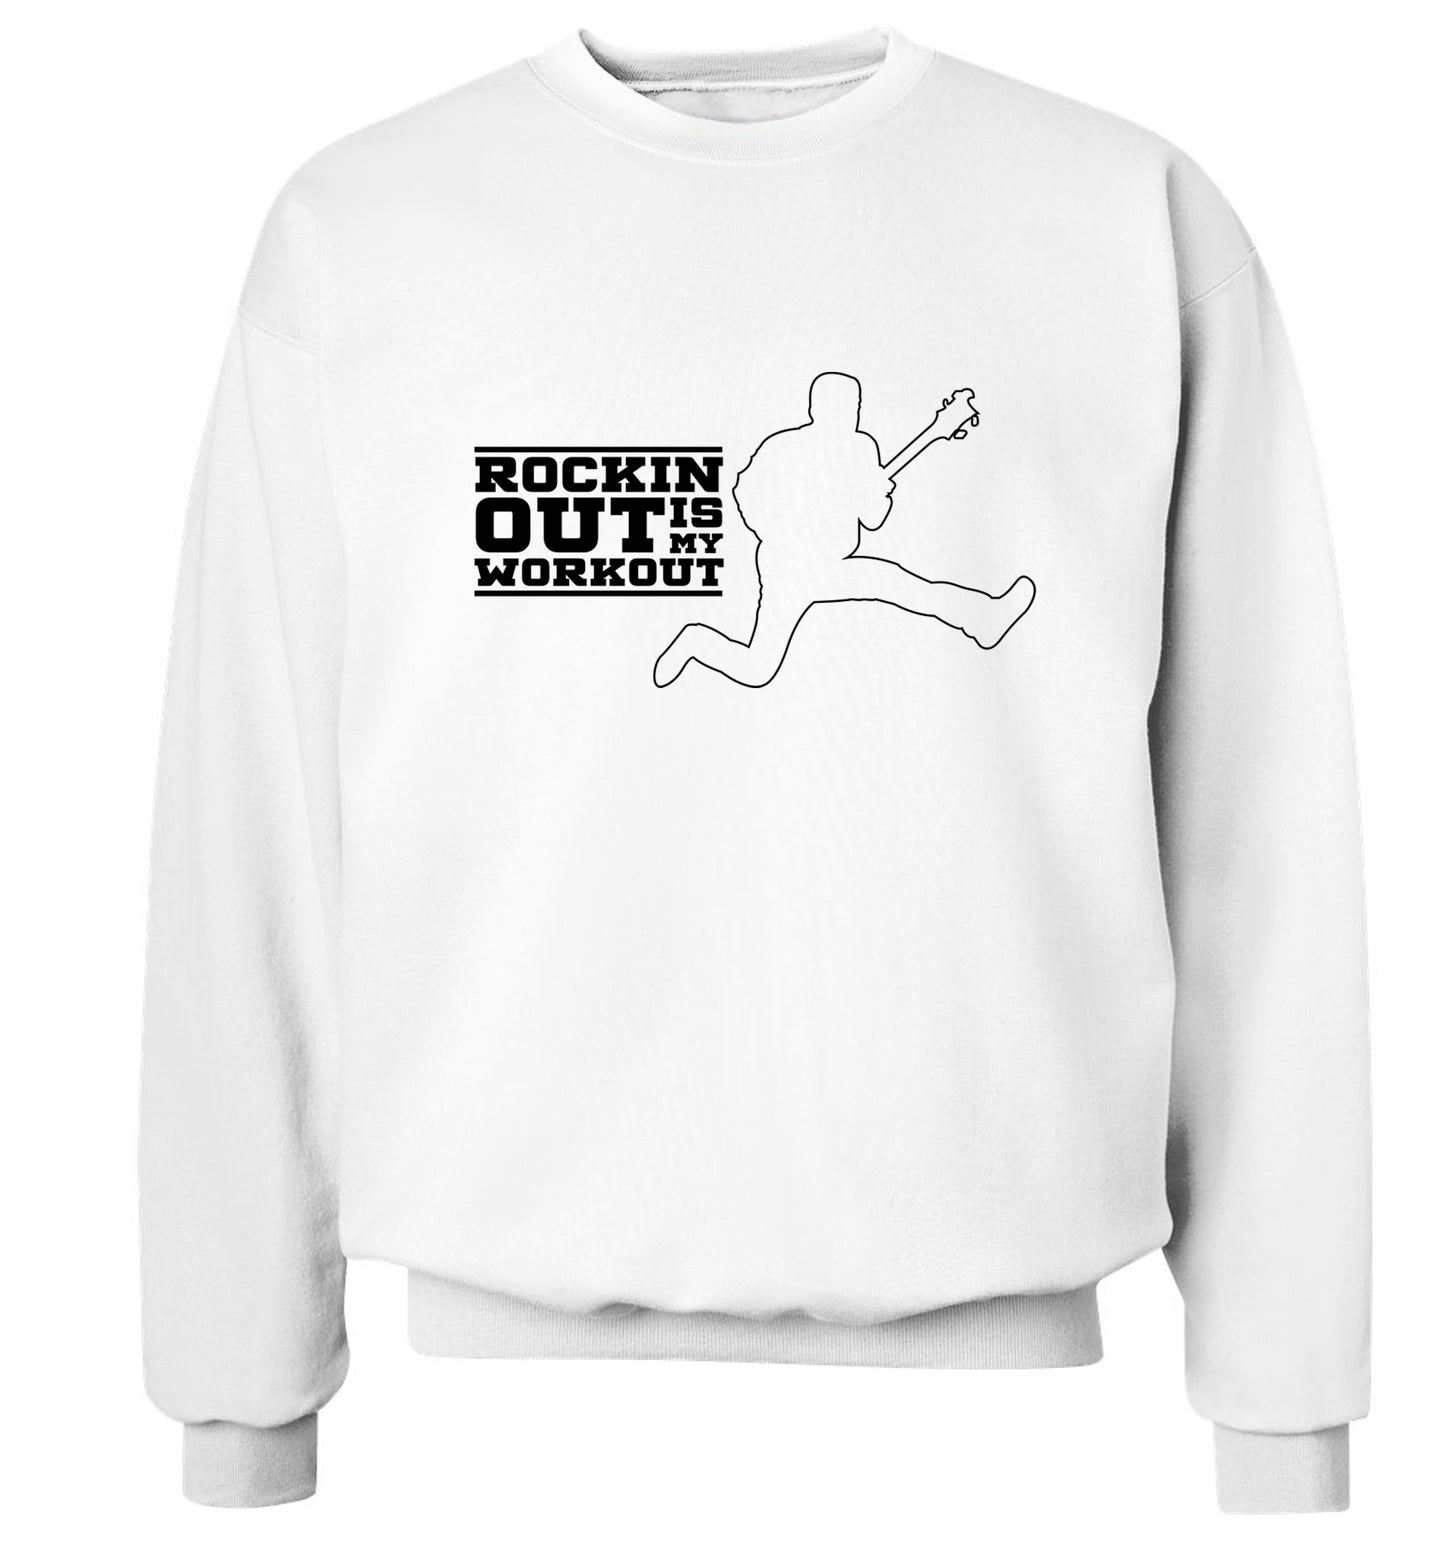 Rockin out is my workout Adult's unisex white Sweater 2XL